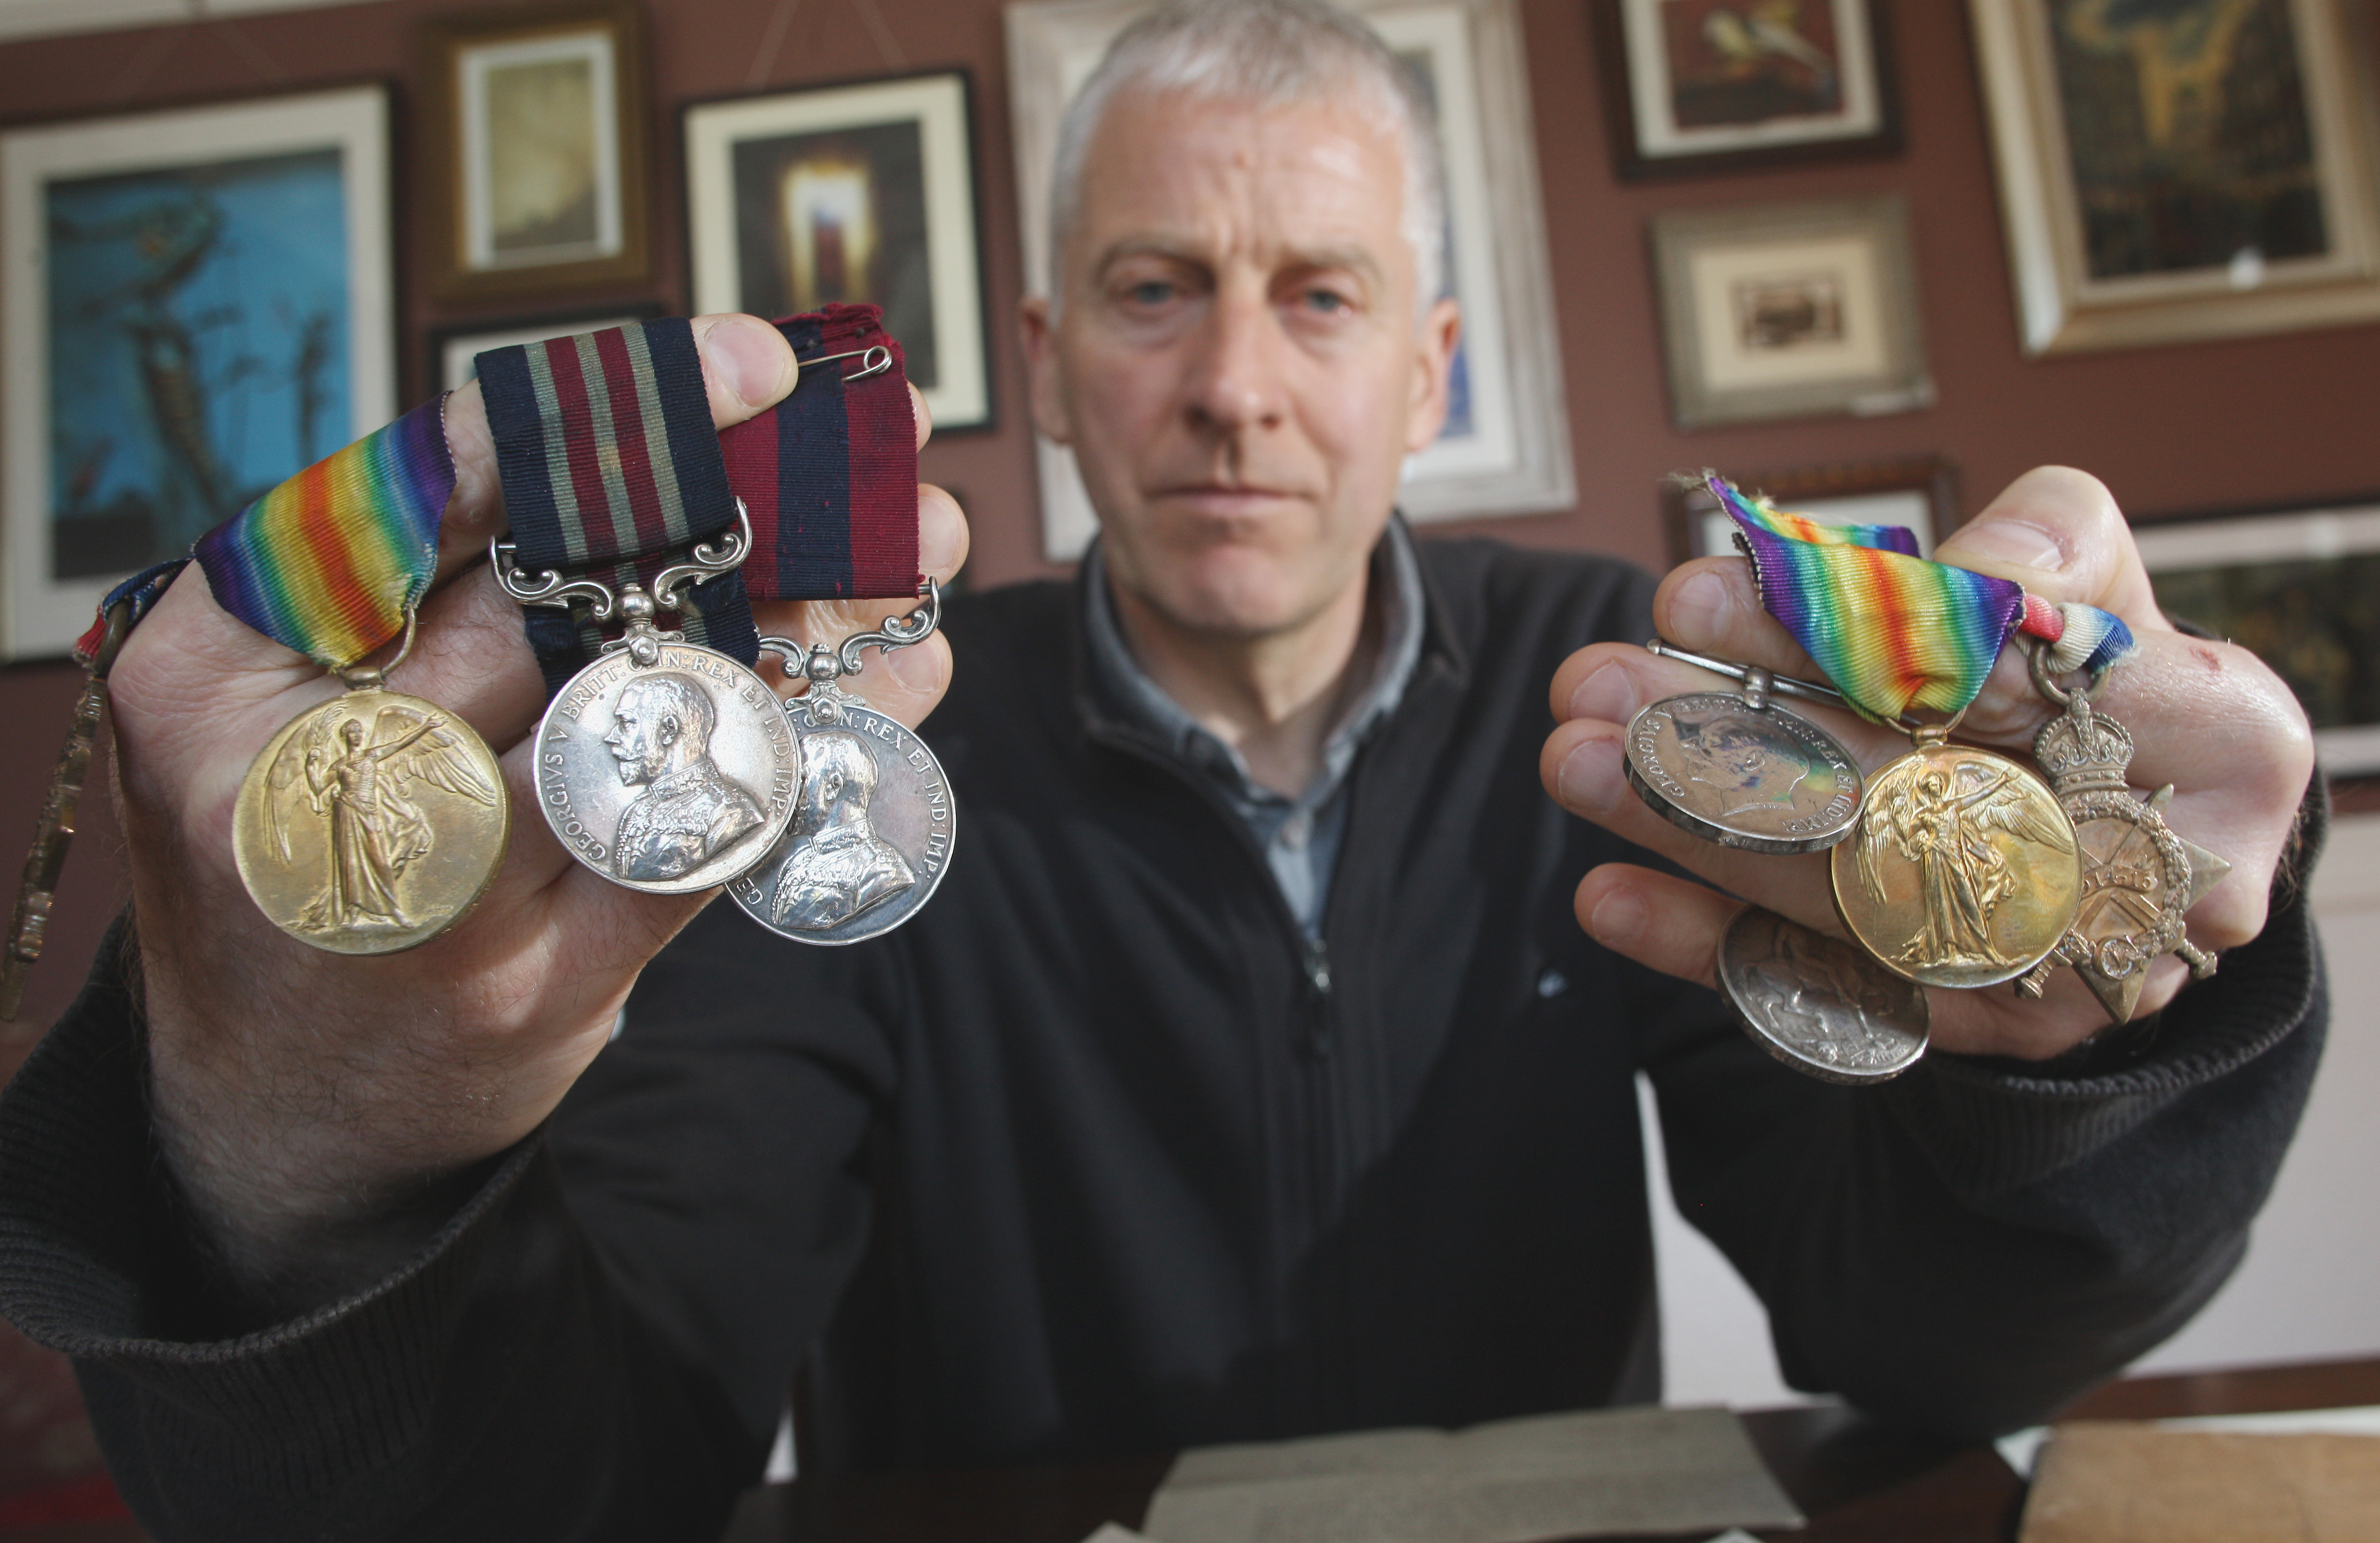 John Pelan stolen medals belonging to his grandfather and great uncle which were returned  